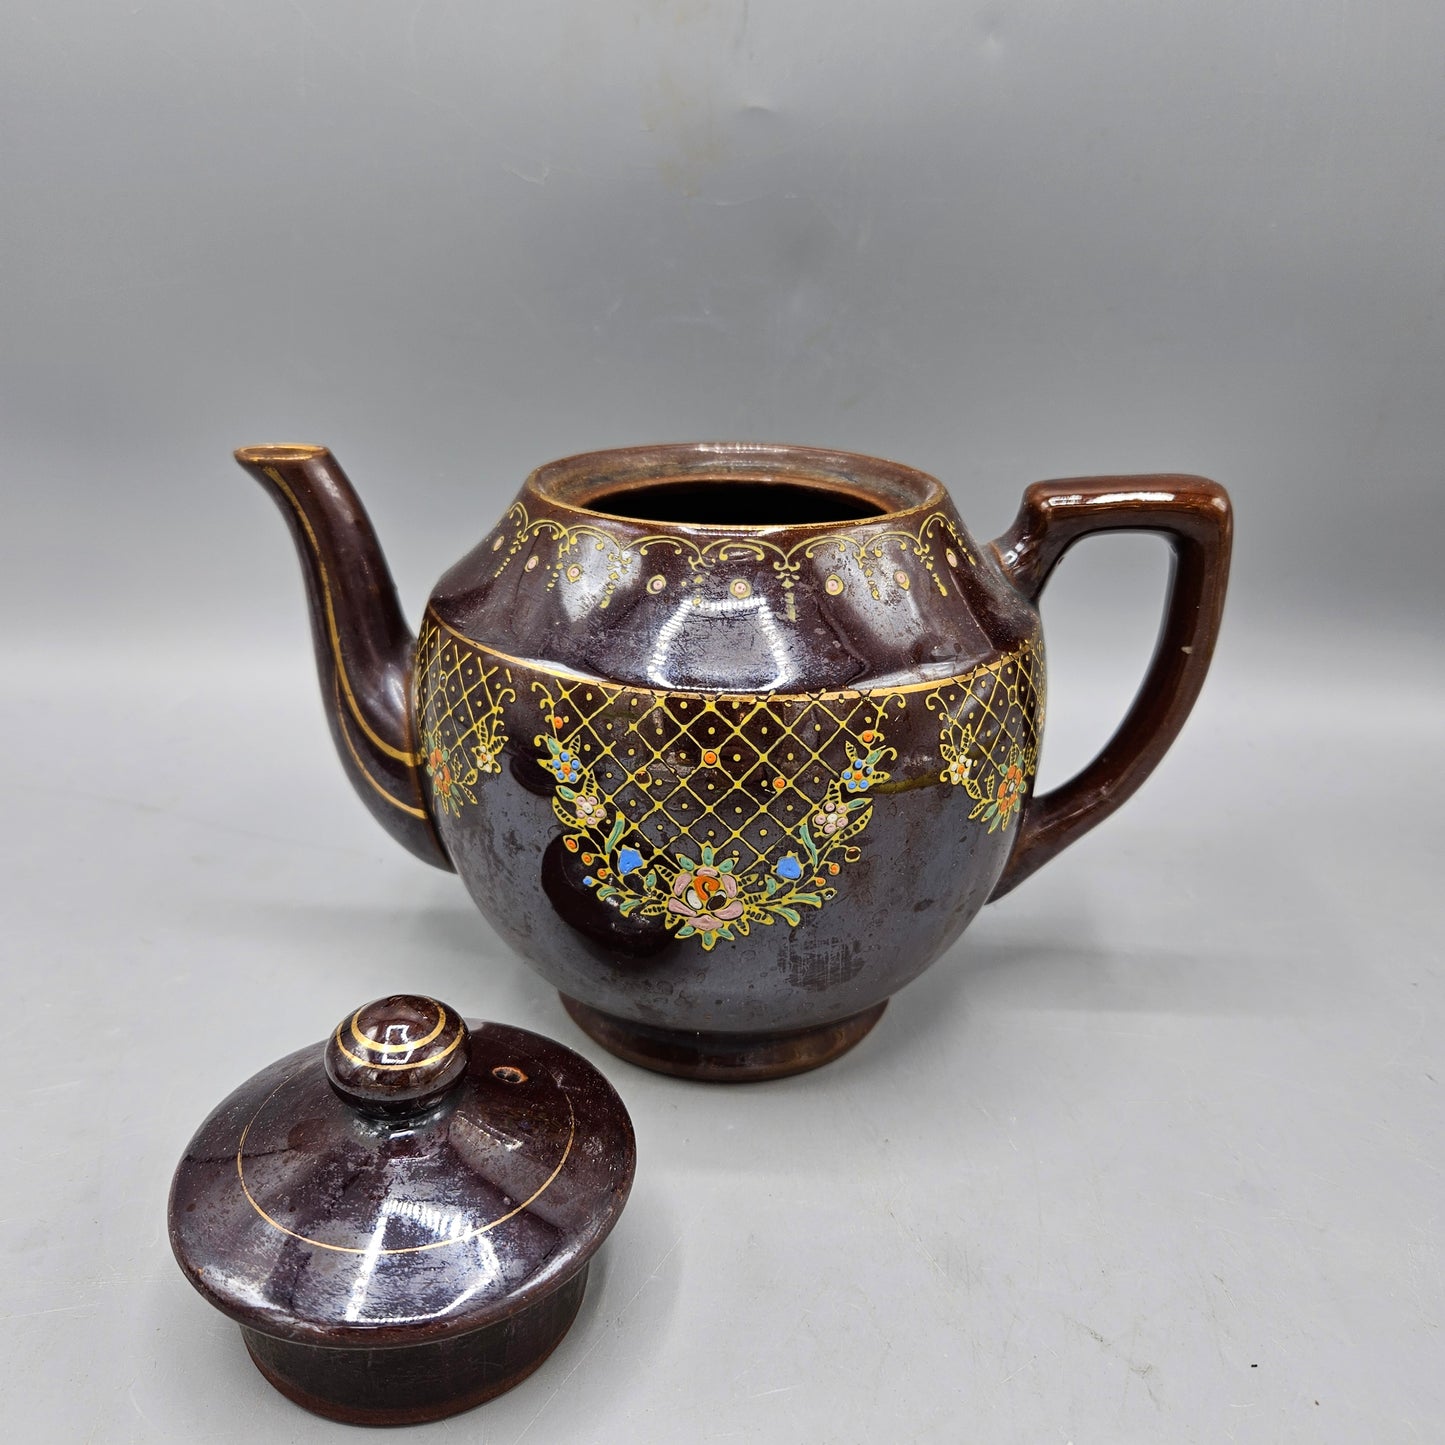 Antique Brown and Gold Moriage Teapot Handpainted in Japan